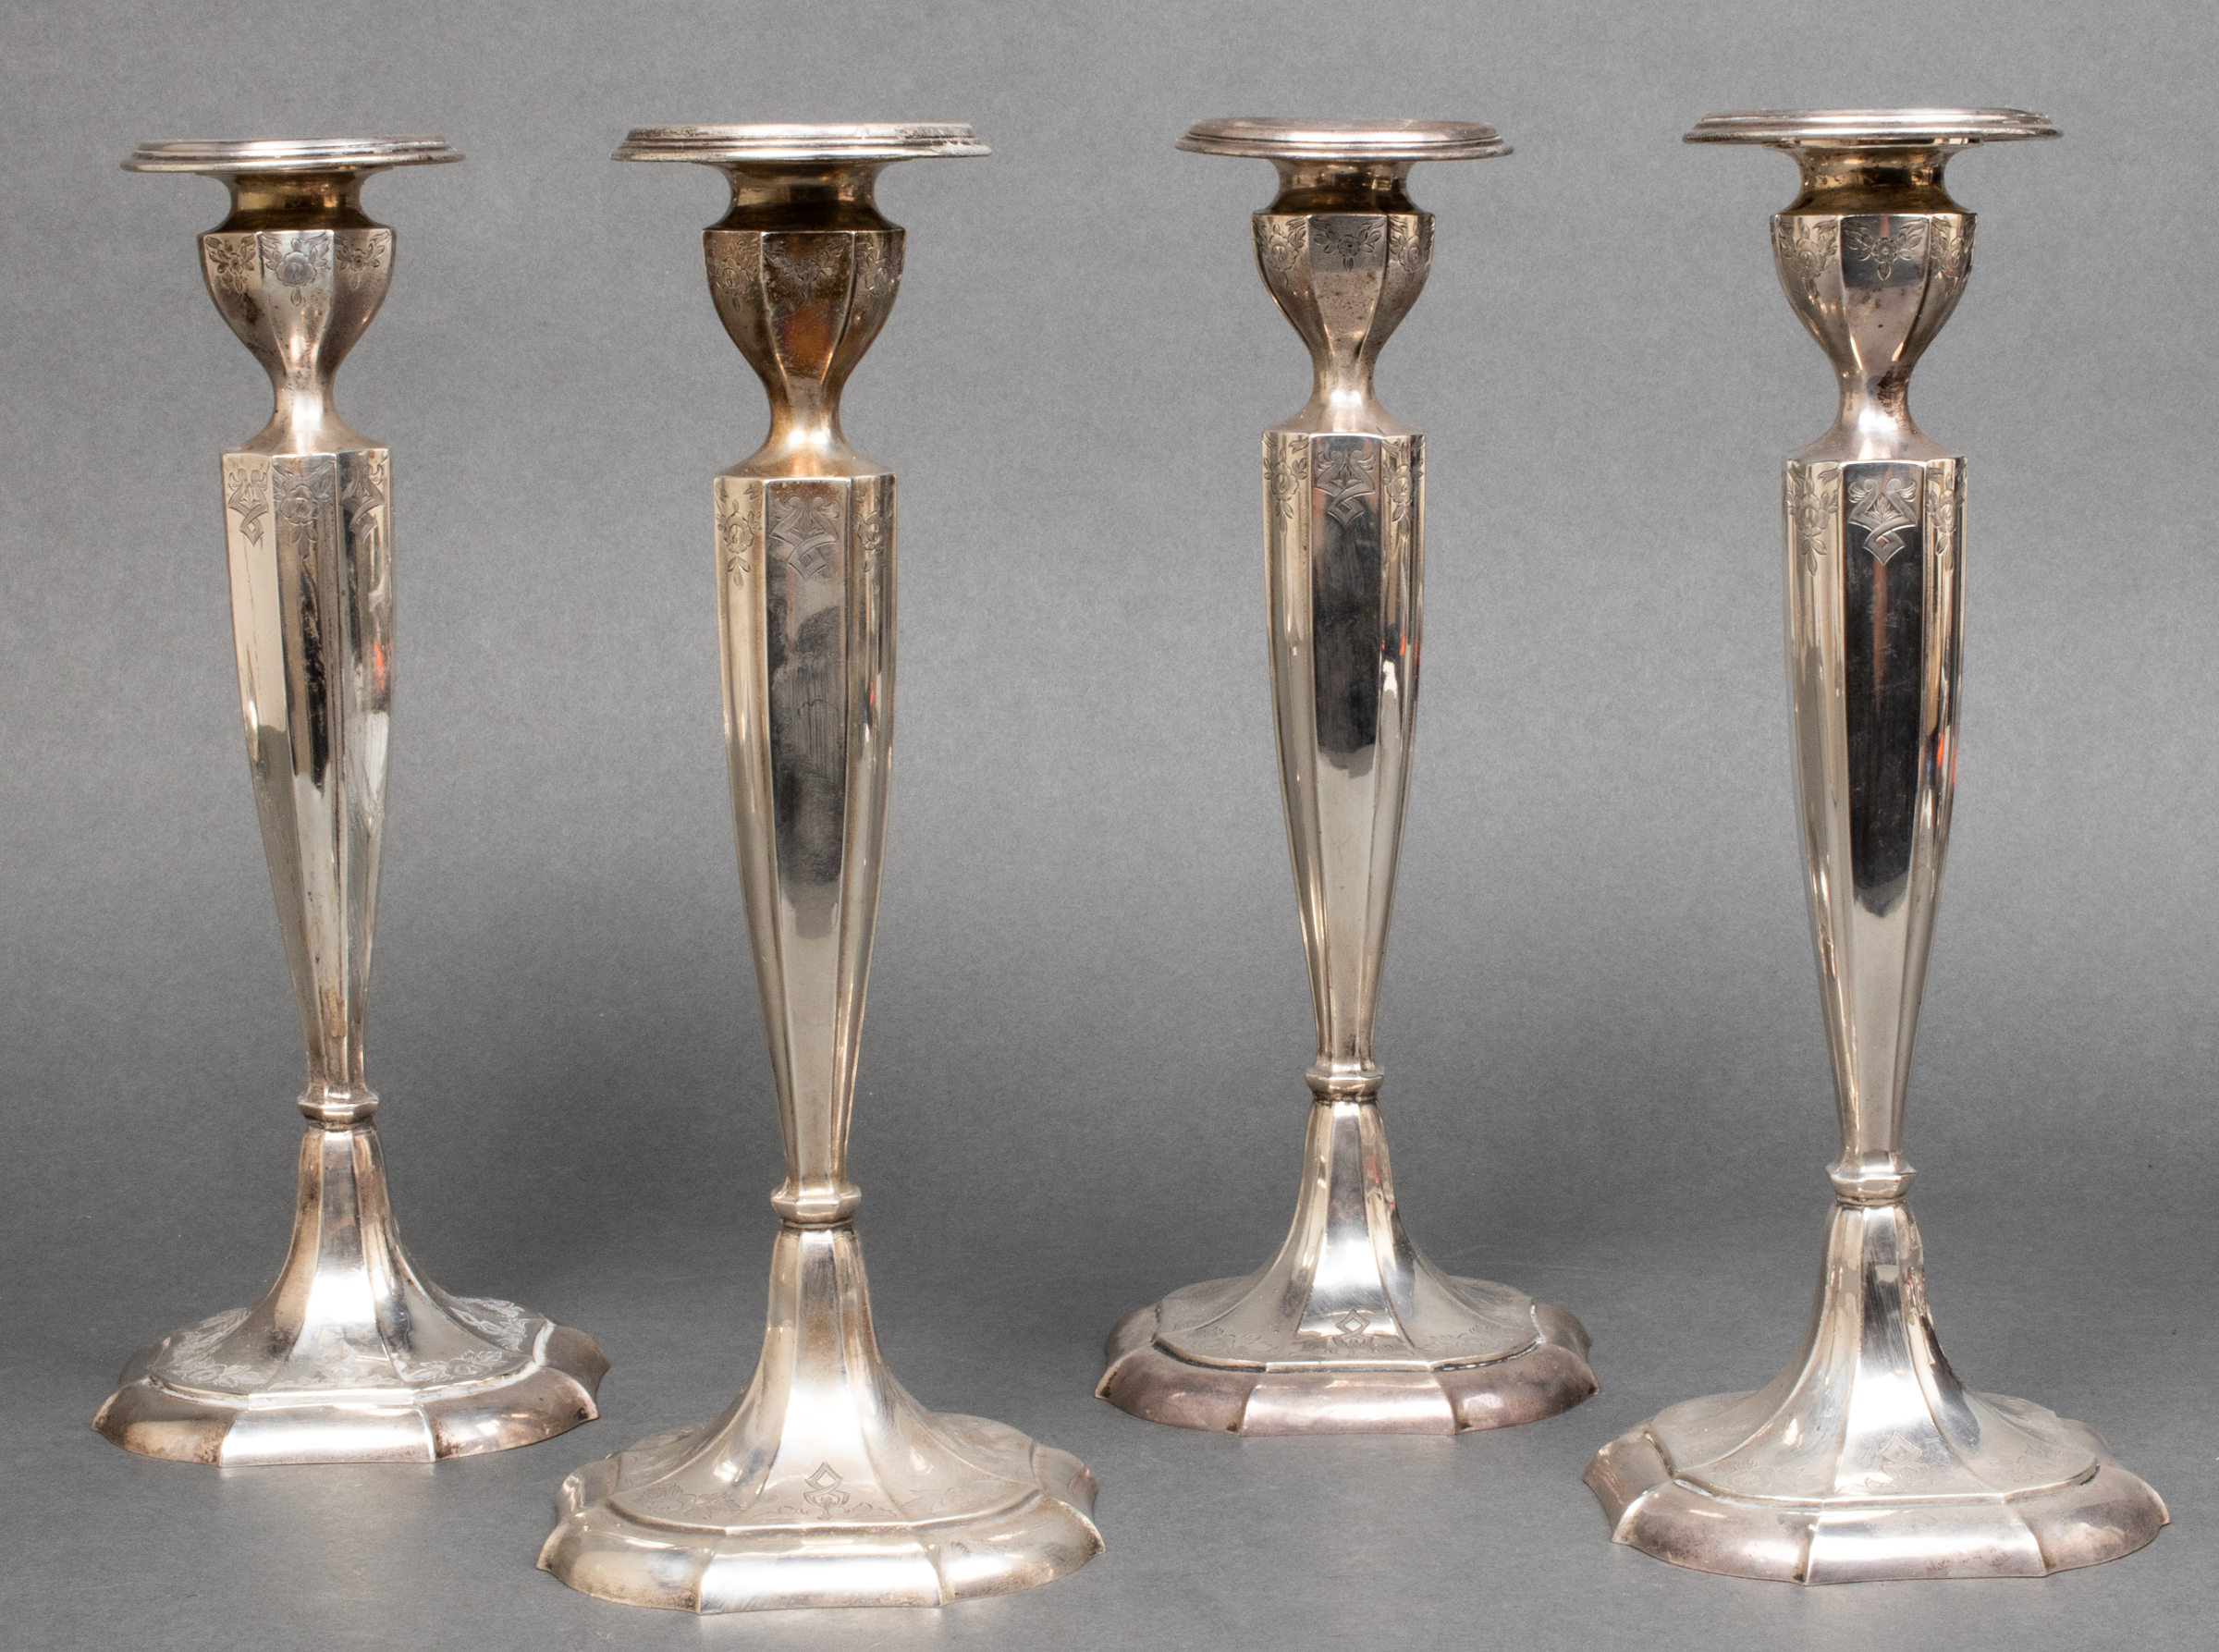 J.S. CO. STERLING SILVER CANDLESTICKS,